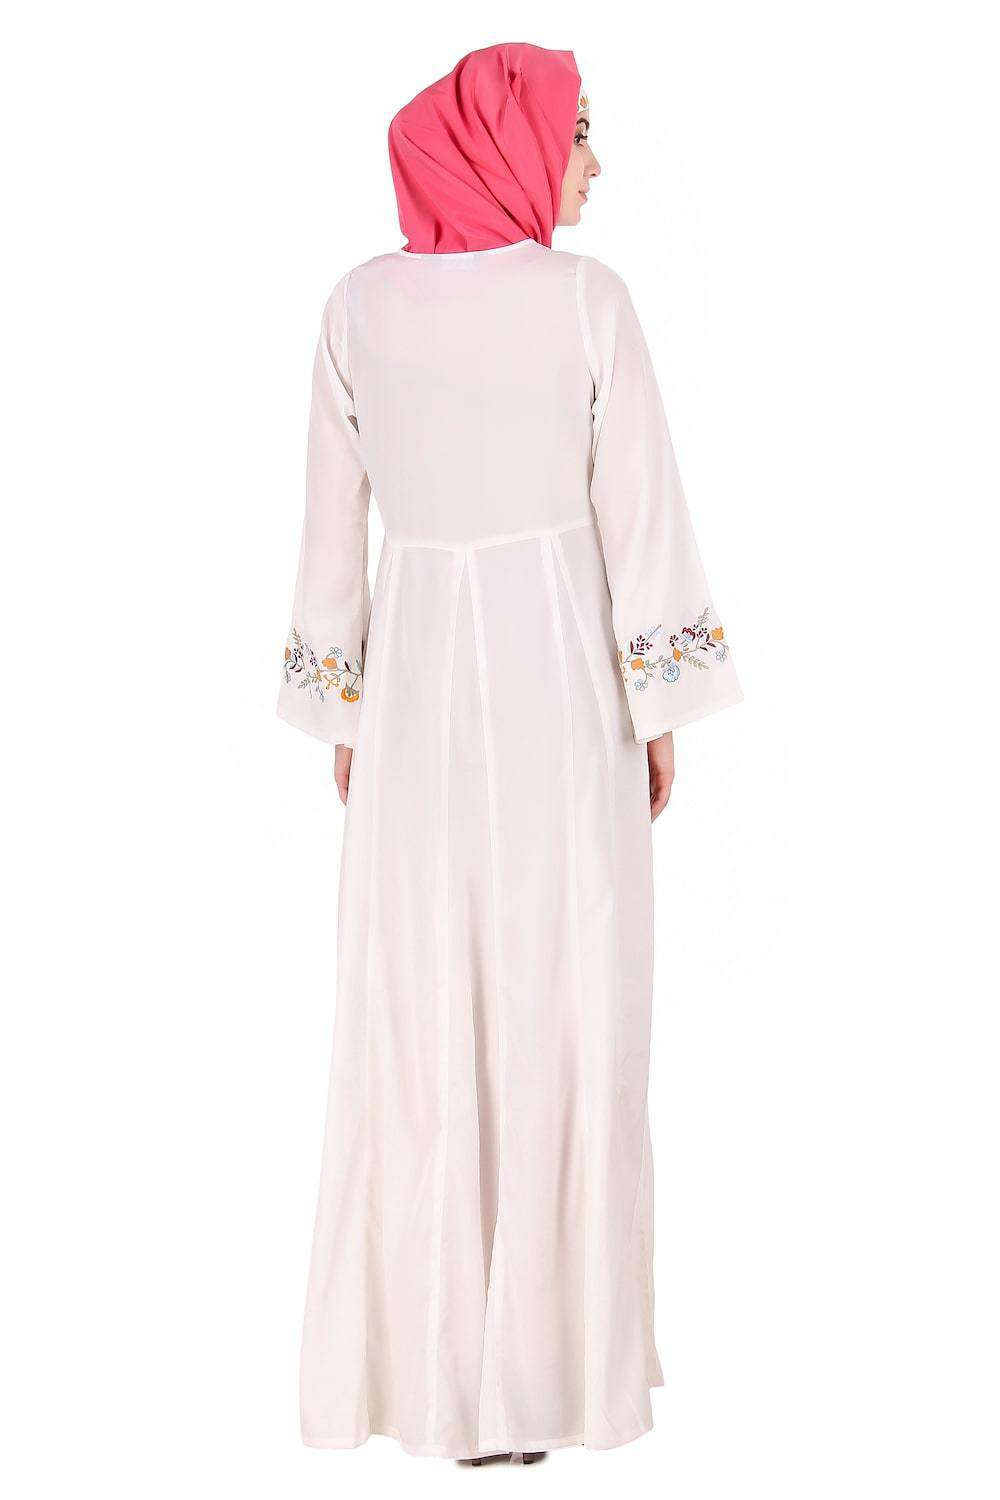 Colorful Embroidered Bell Sleeve White Abaya Back